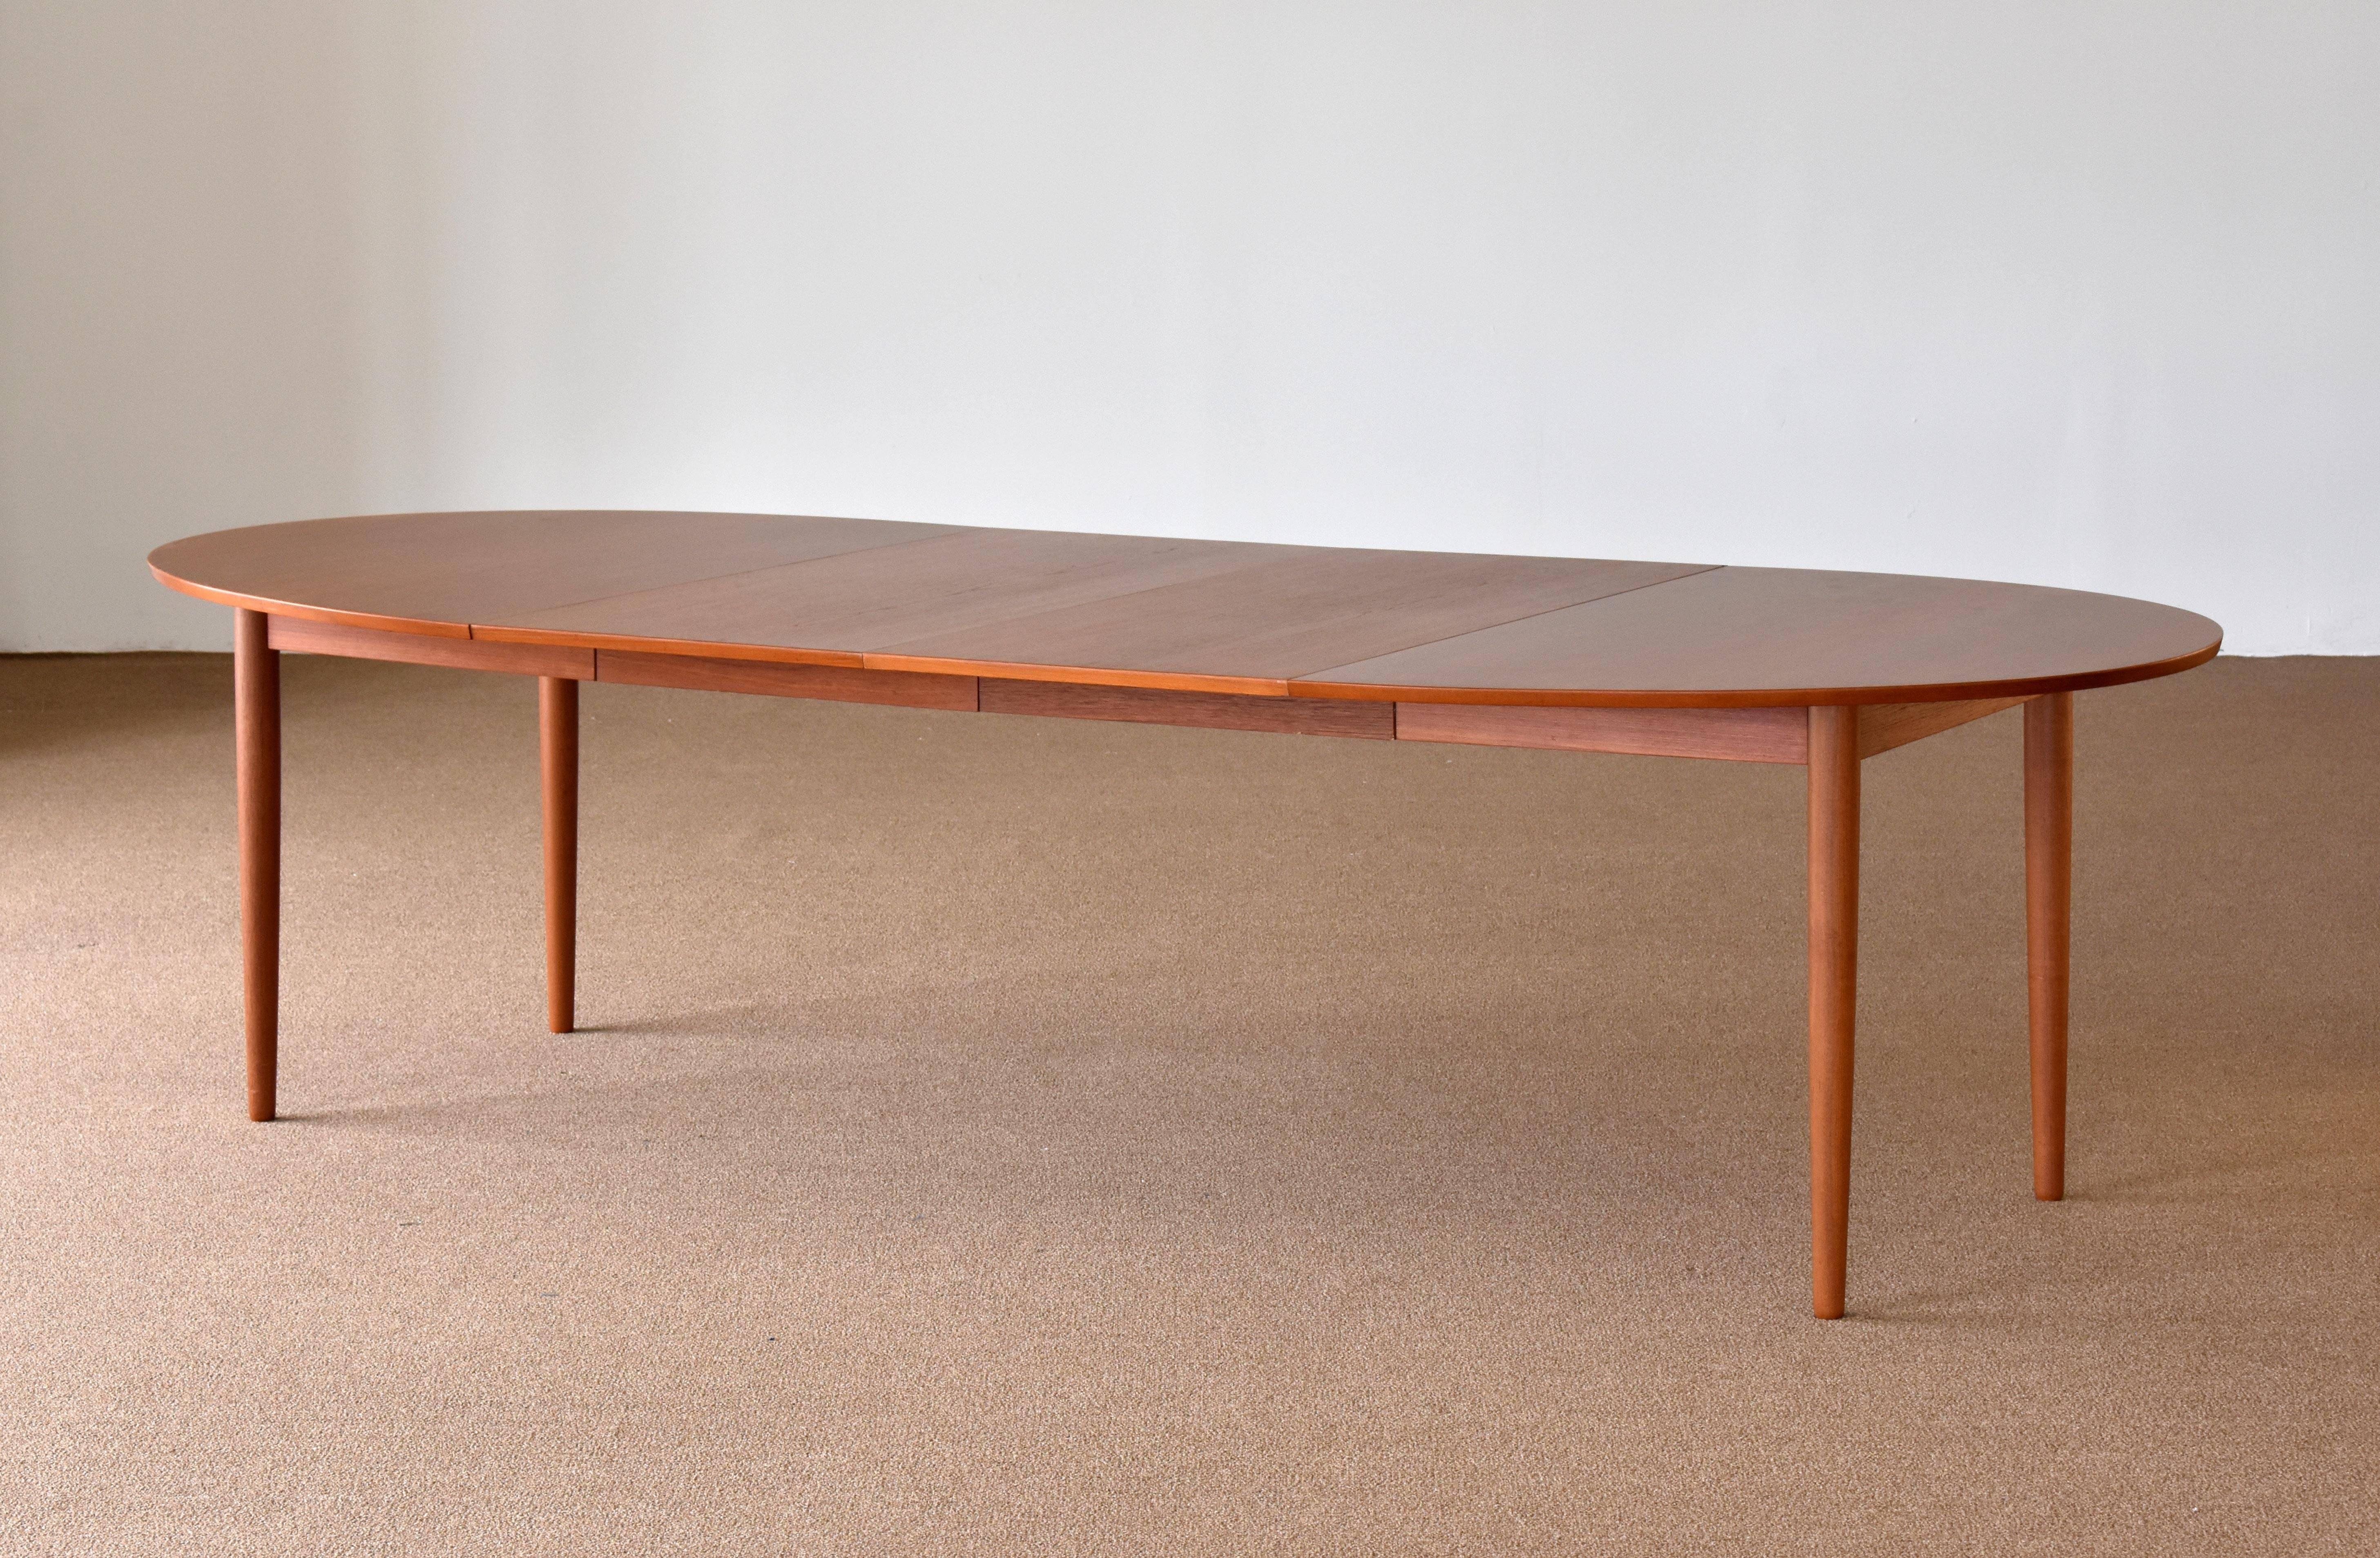 Finn Juhl large dining table, form of top suggests it's a variation of the 